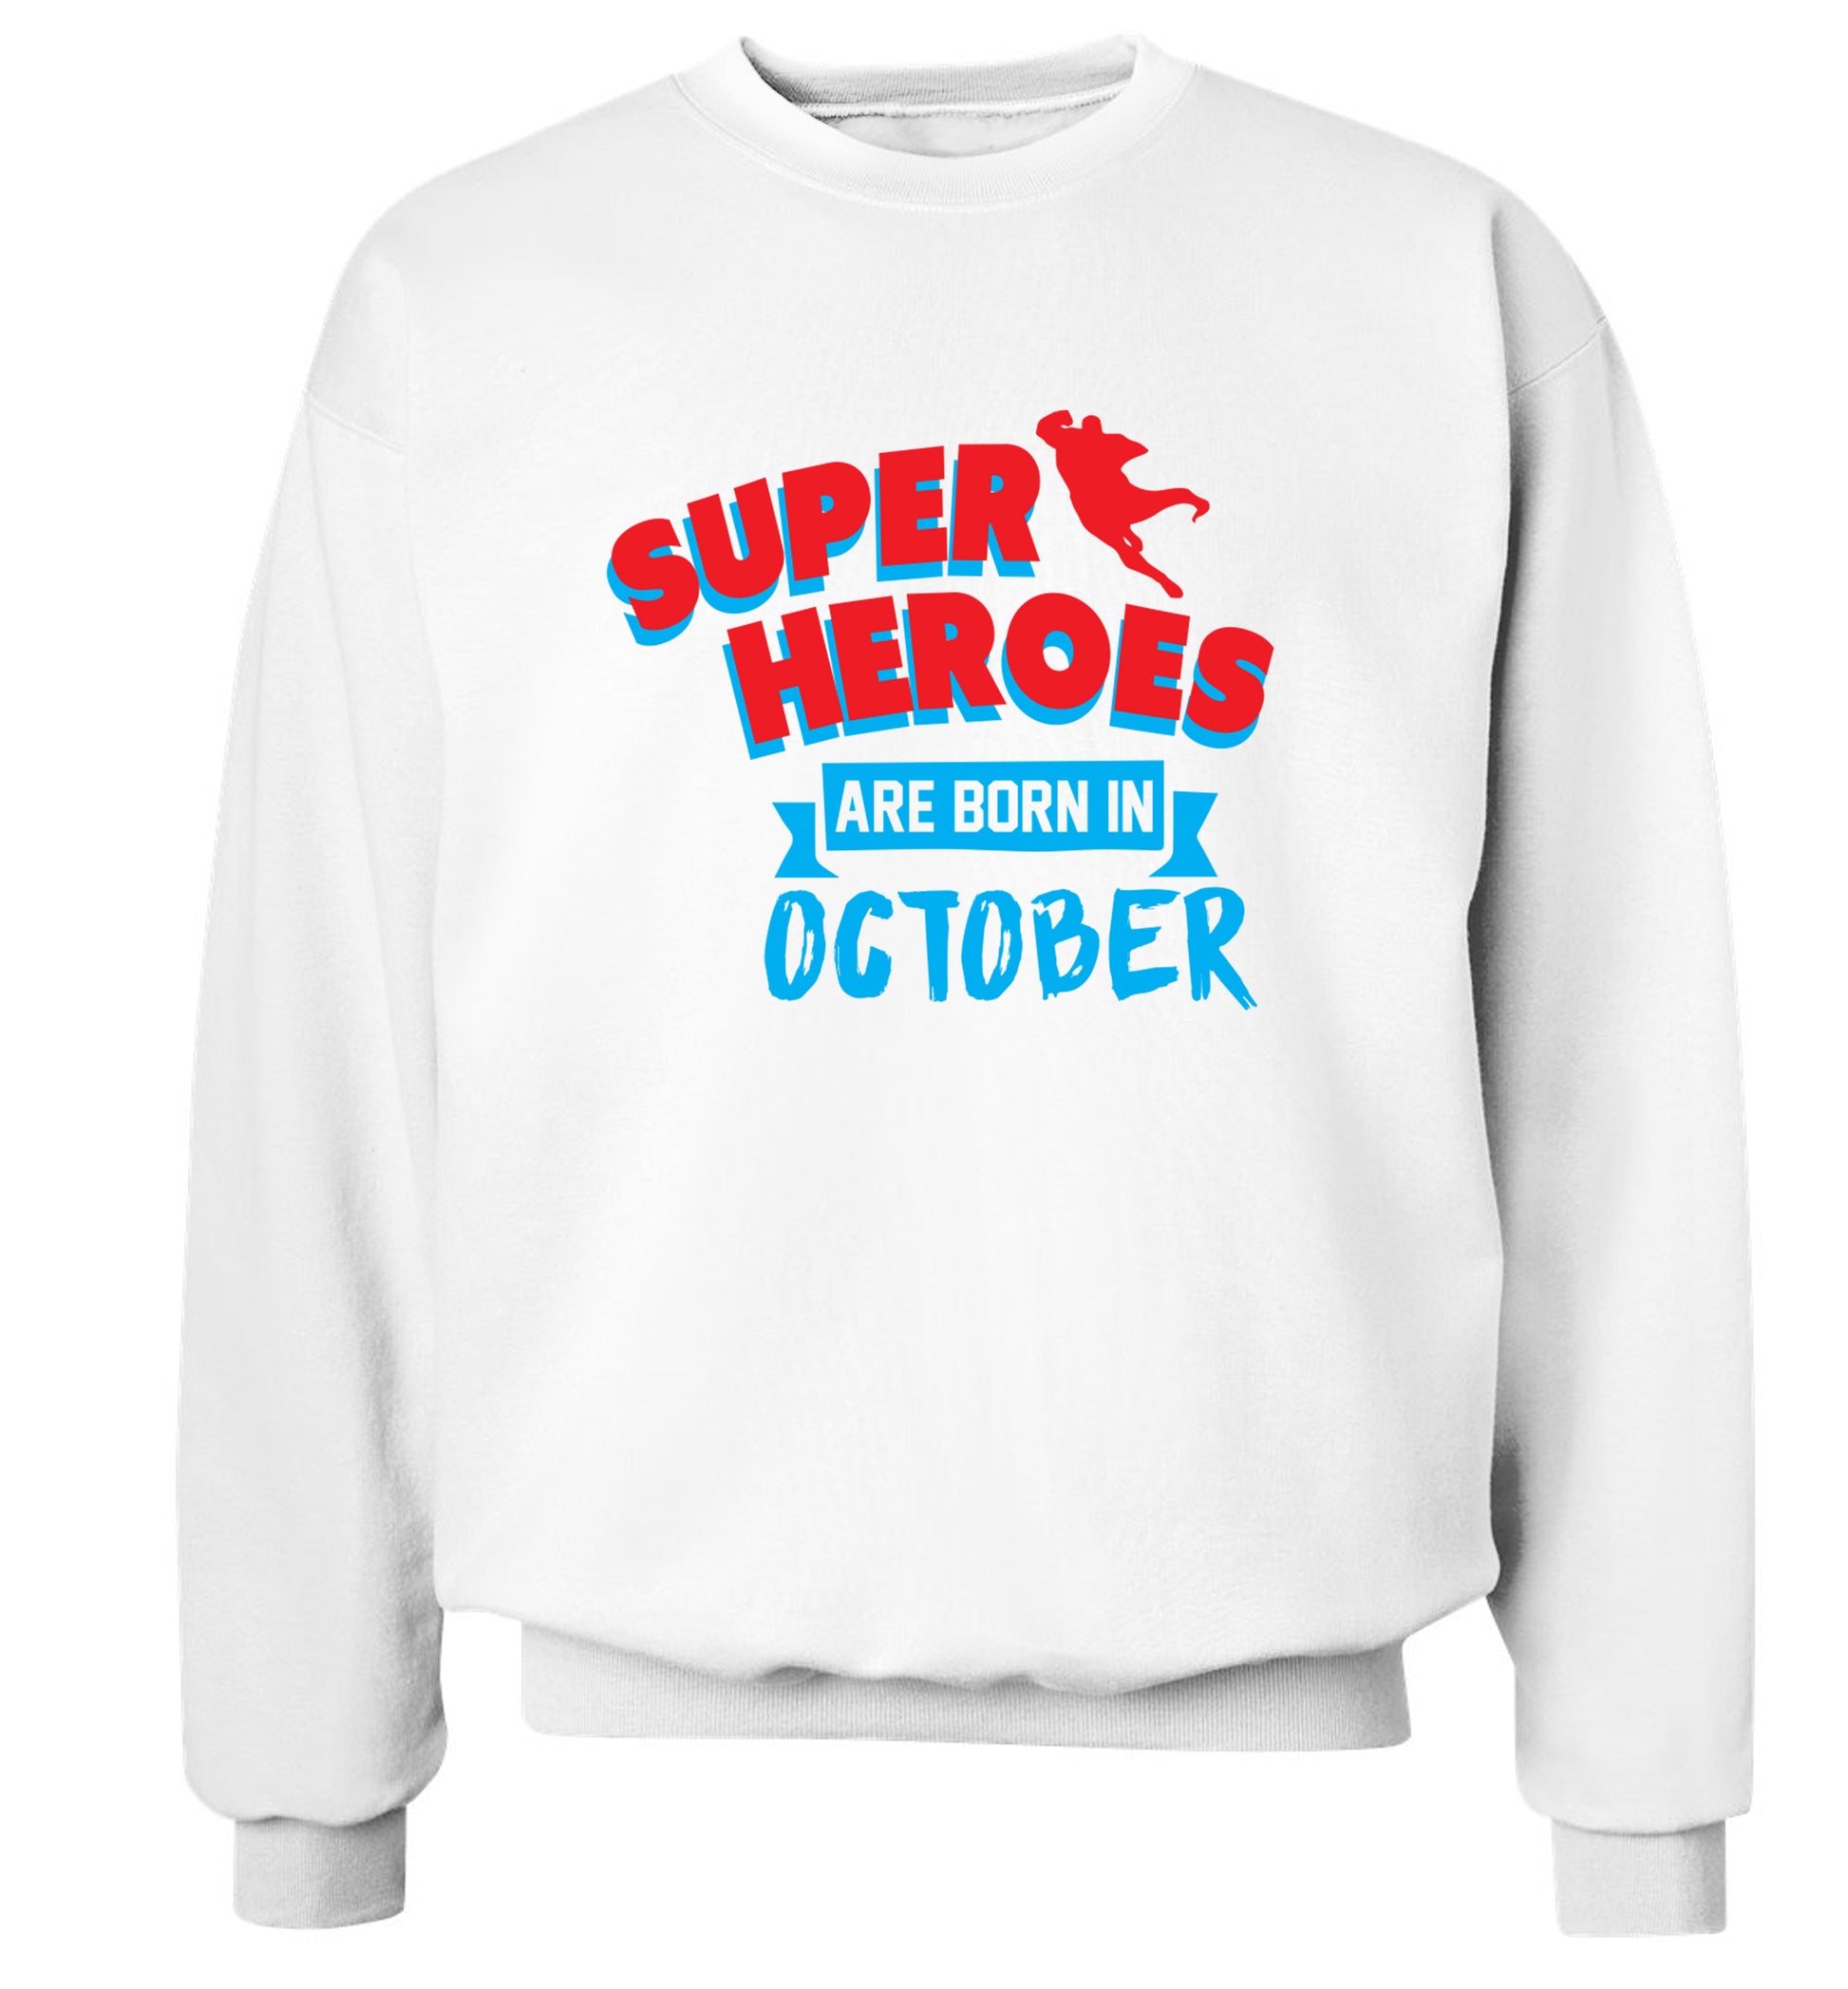 Superheroes are born in October Adult's unisex white Sweater 2XL